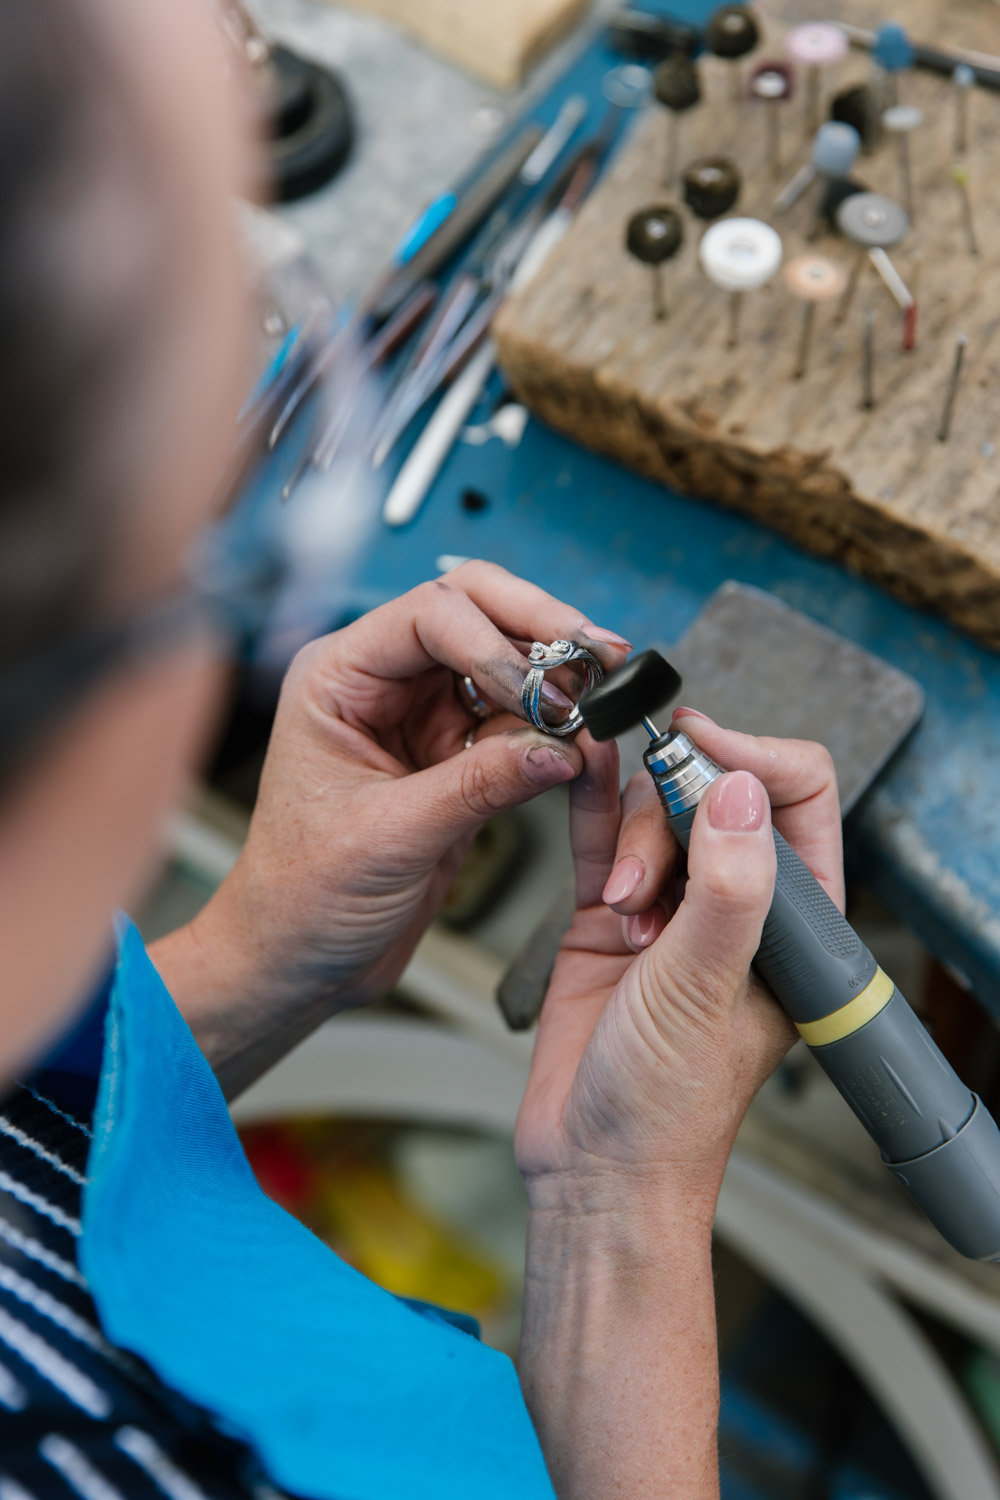 A jeweller polishes a sterling silver ring at her workbench